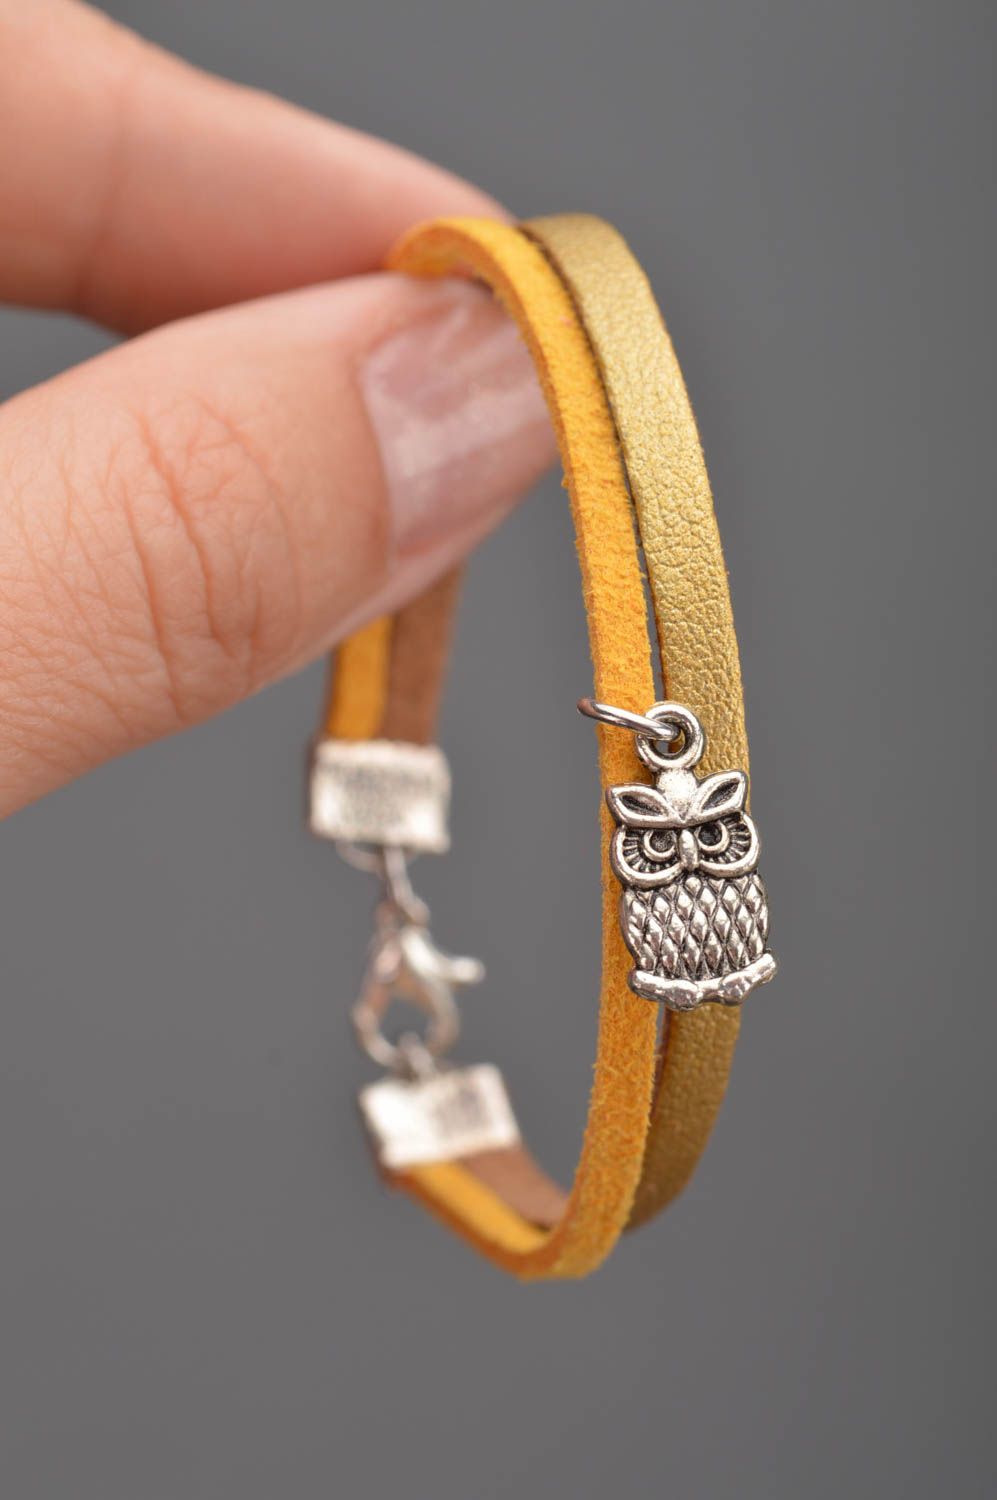 Handmade yellow and gold leather cord wrist bracelet with metal charm Owl photo 2